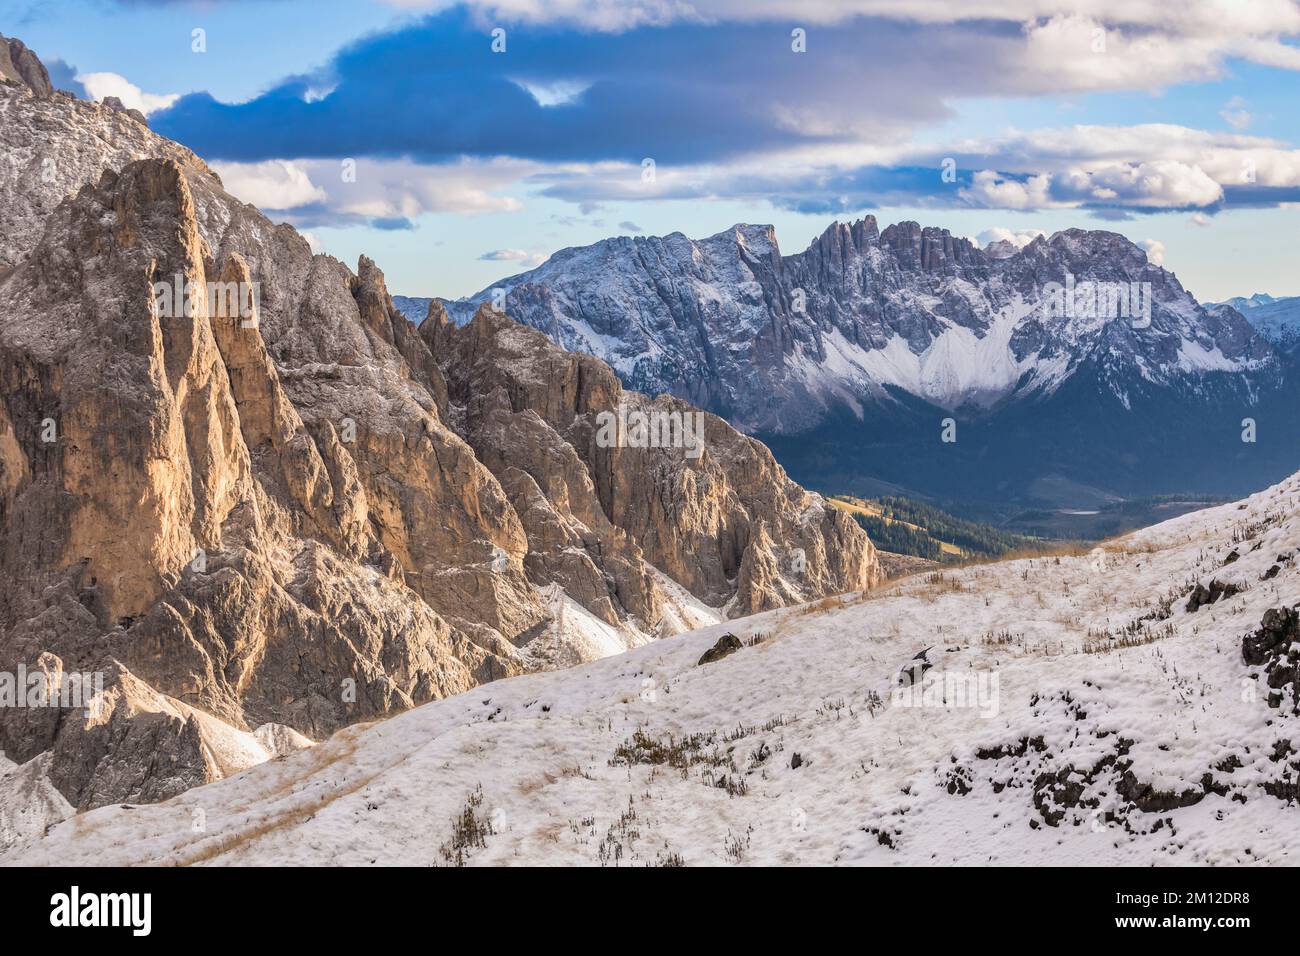 Italy, South Tyrol, province of Bolzano, the Latemar group, elevated view going up towards the Cima di Terrarossa, Dolomites Stock Photo